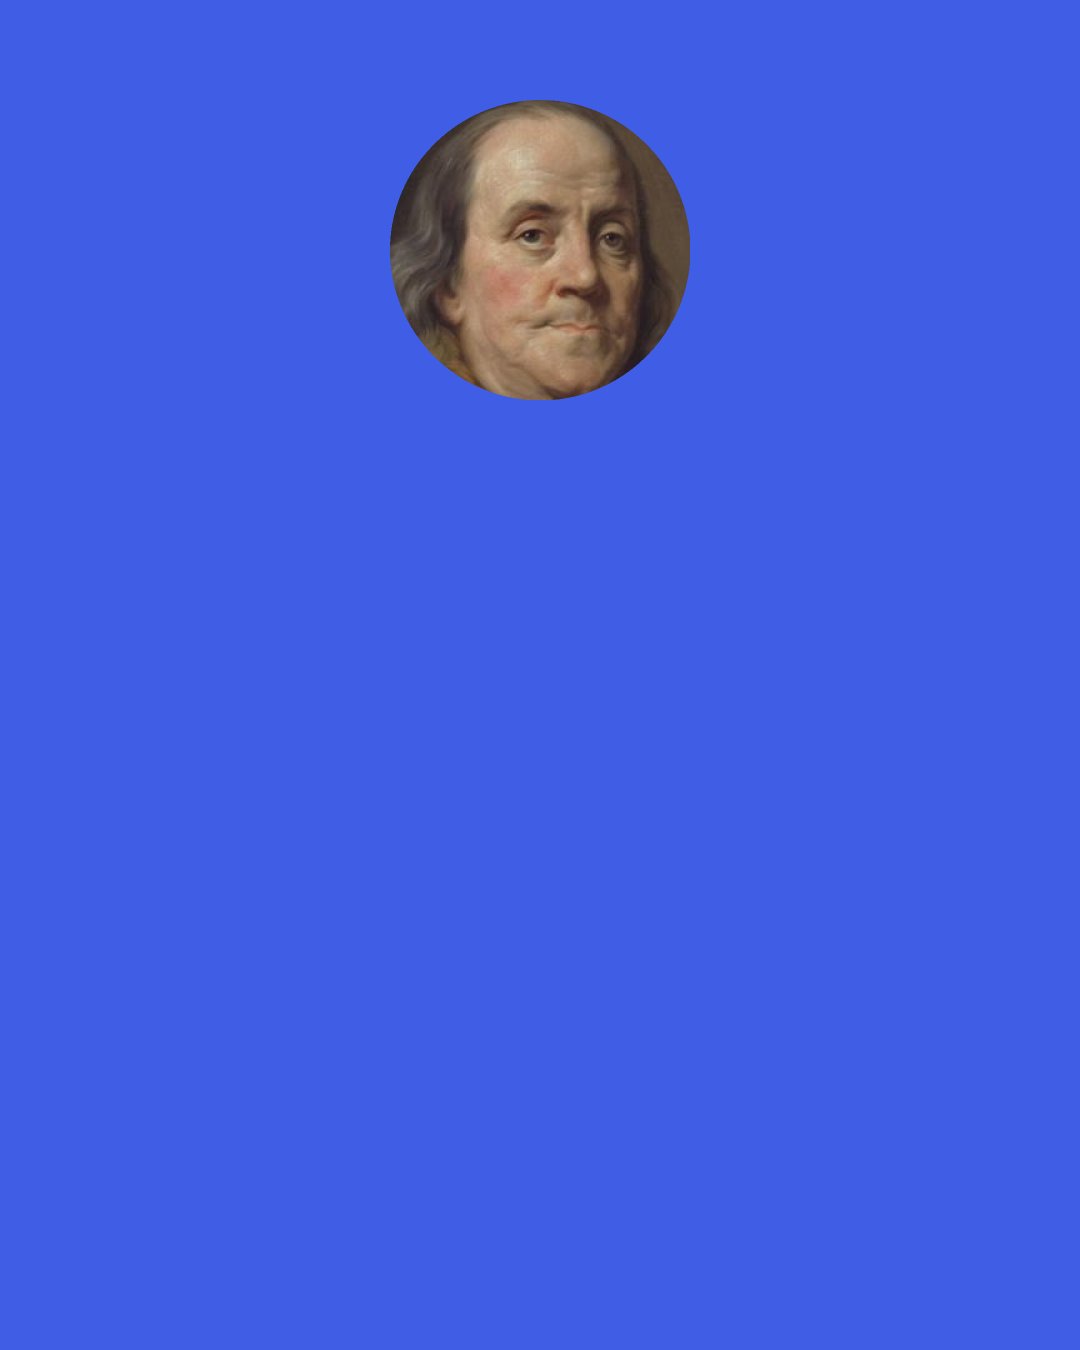 Benjamin Franklin: Be temperate in wine, in eating, girls, & sloth; Or the Gout will seize you and plague you both.